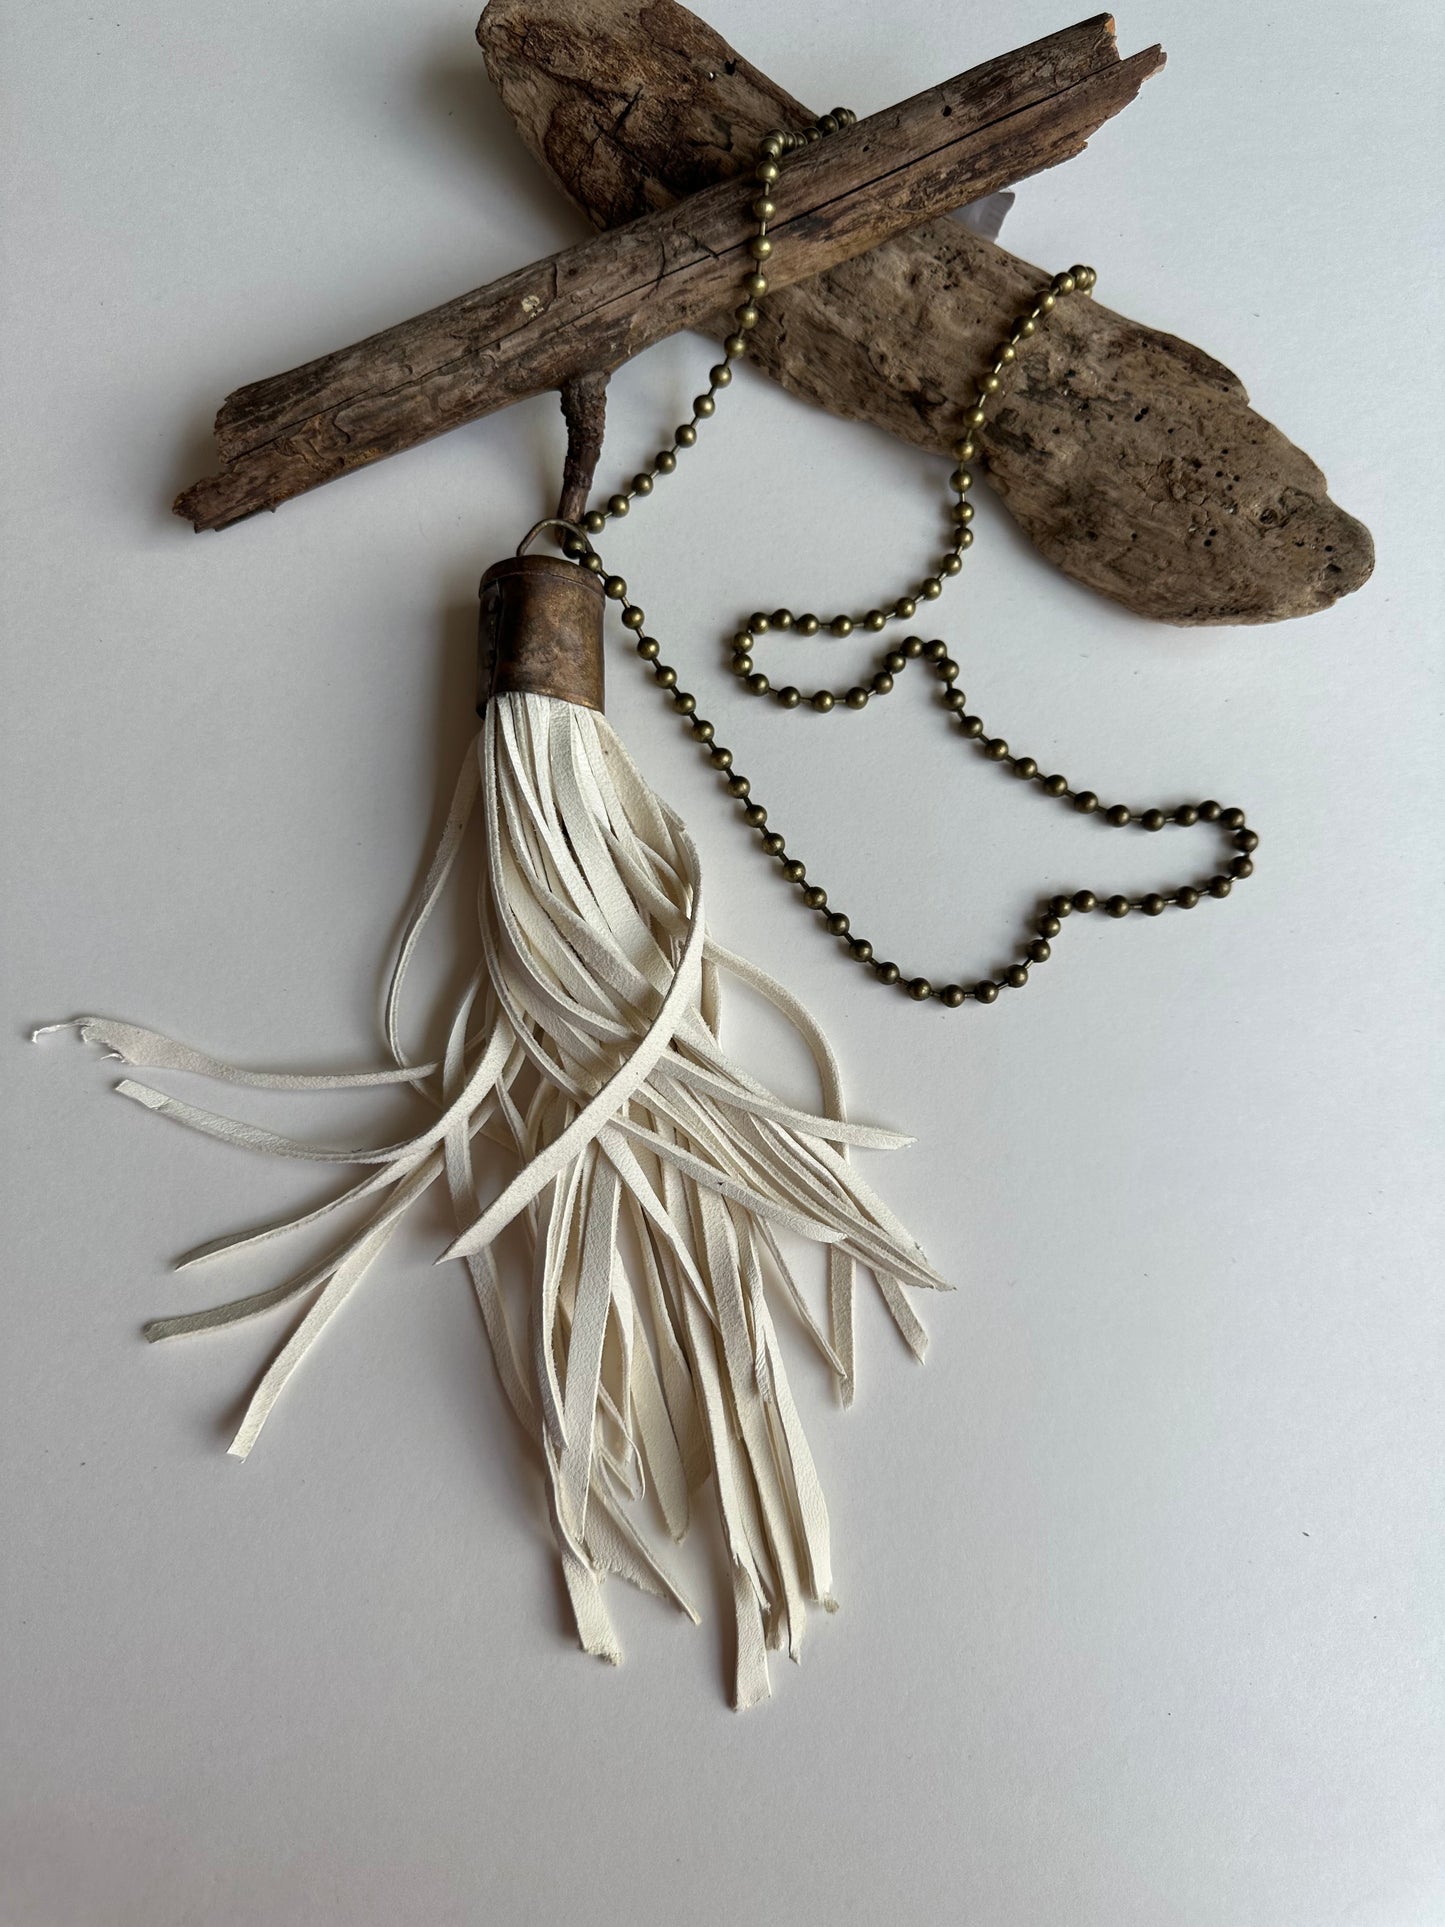 Spring Gypsy Tassel Necklace in Cream - SpiritedBoutiques Boho Hippie Boutique Style Necklace, Art by Amy